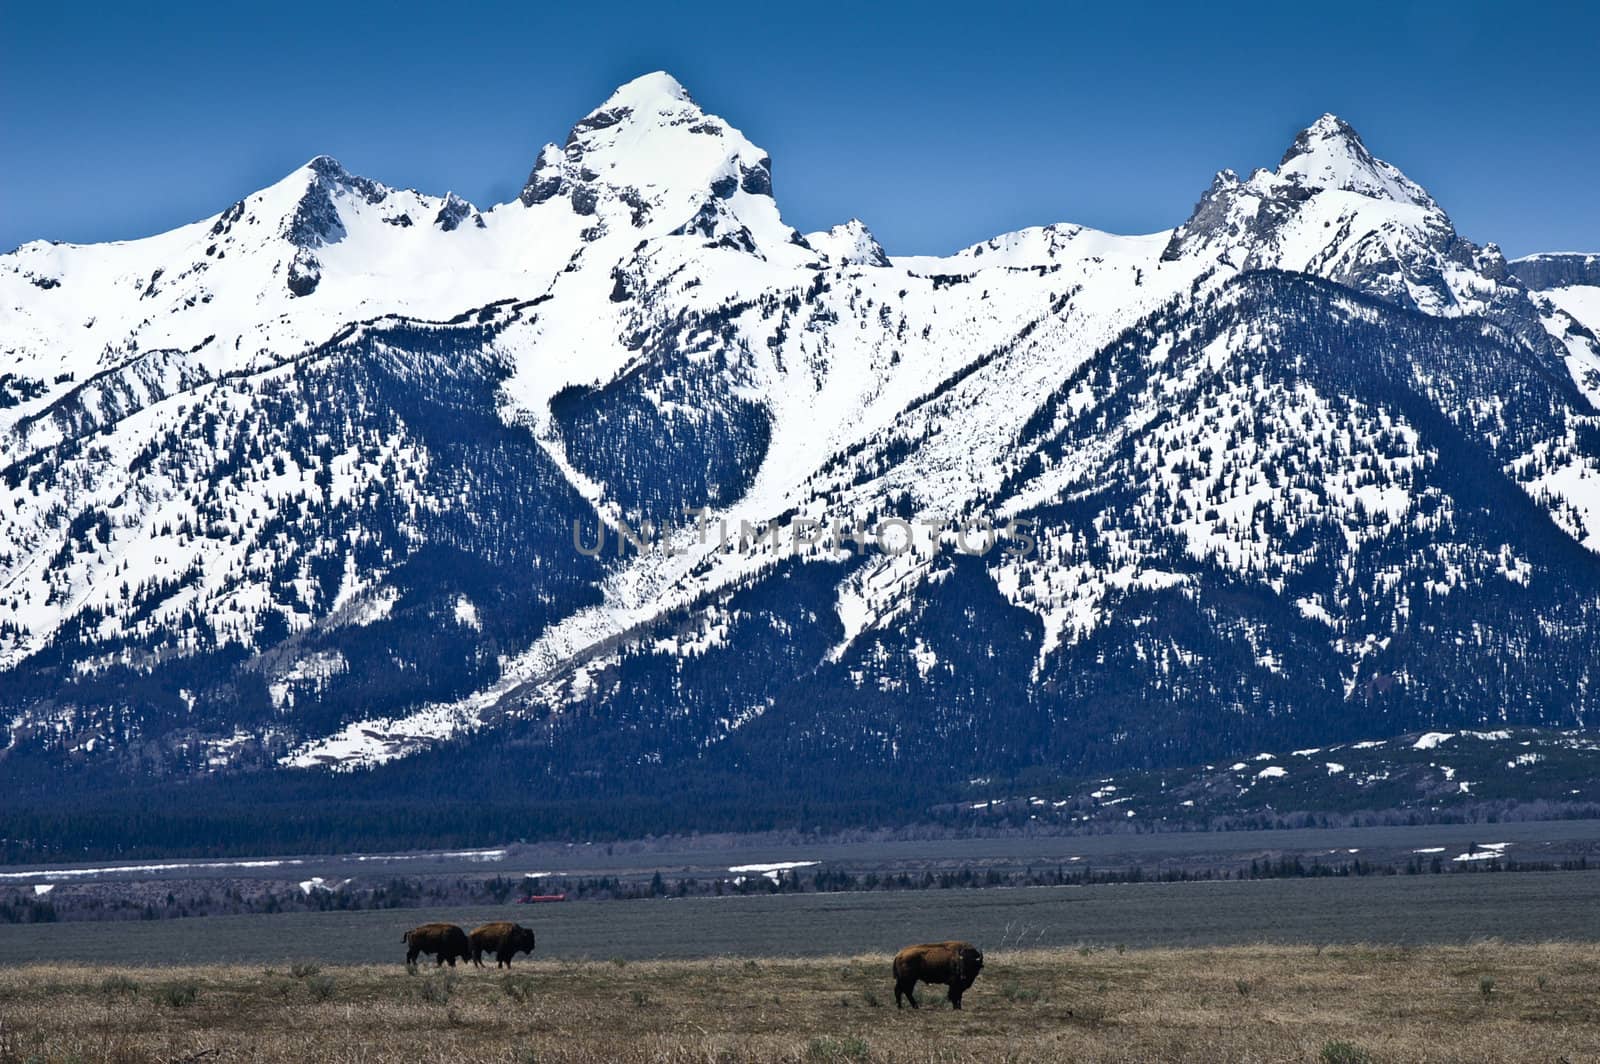 Grand Tetons in Winter home to bison by emattil